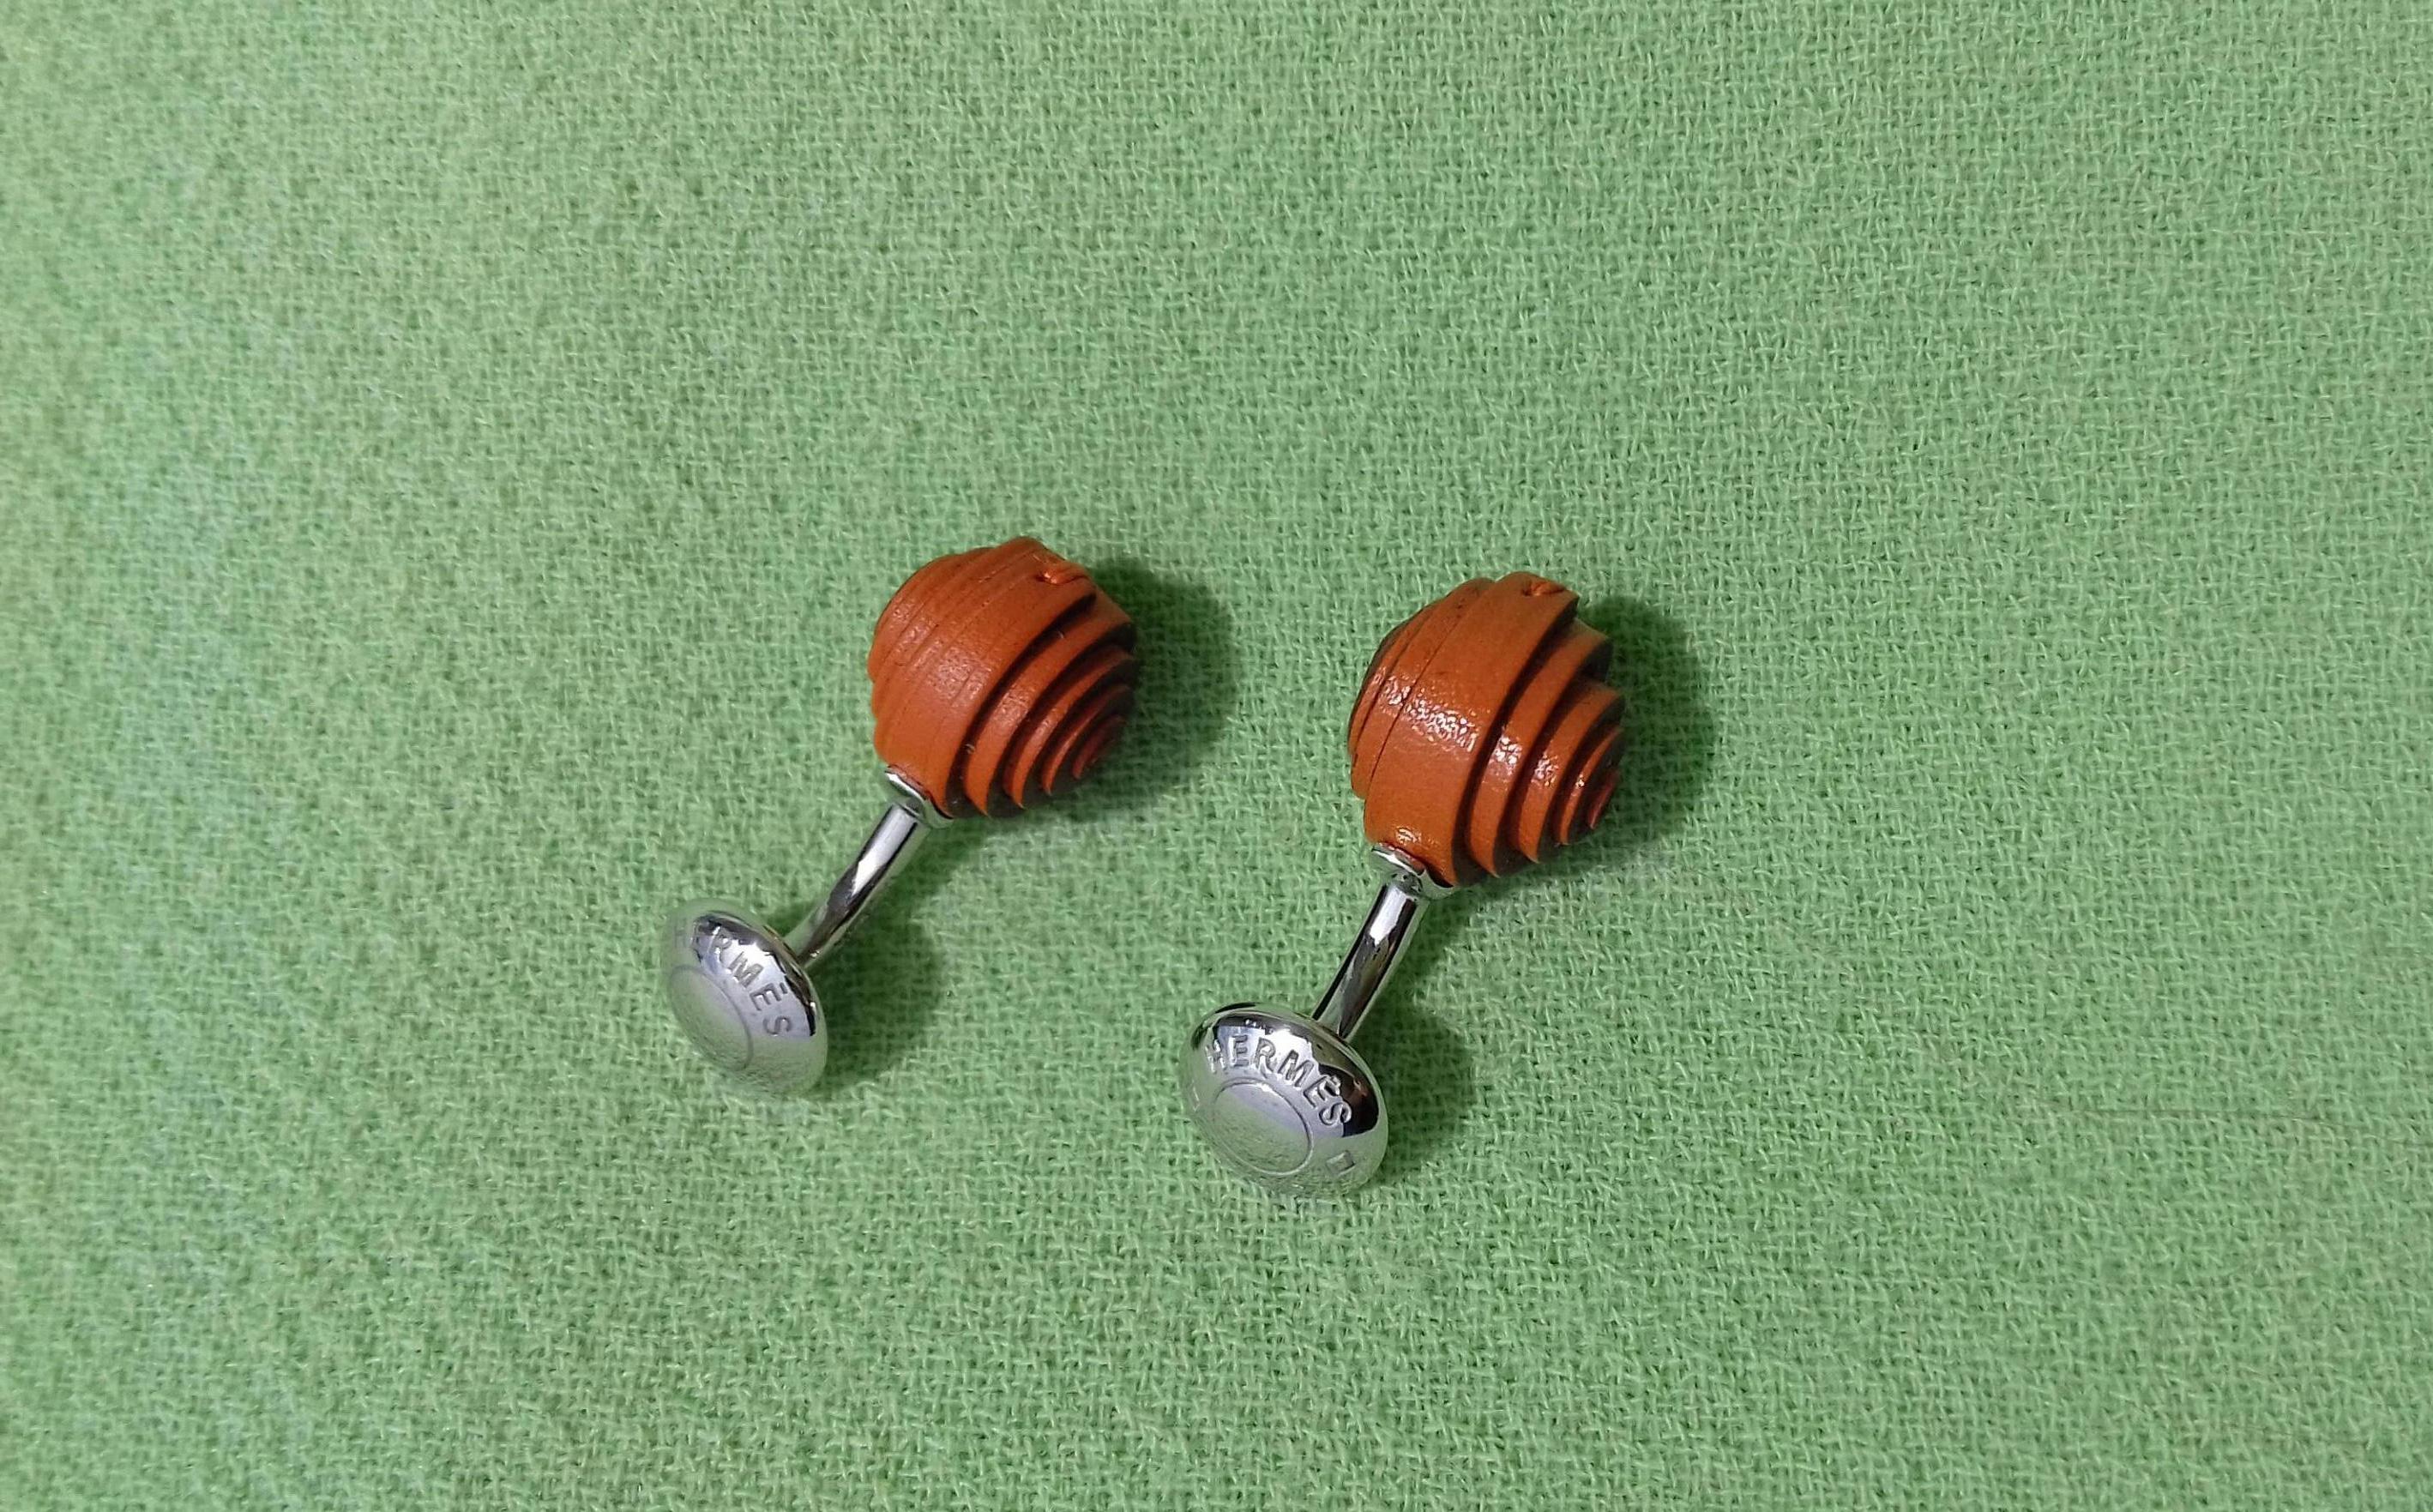 Hermès Coiled Leather and Sterling Silver Cuffs Button Snail Shaped Cufflinks  3